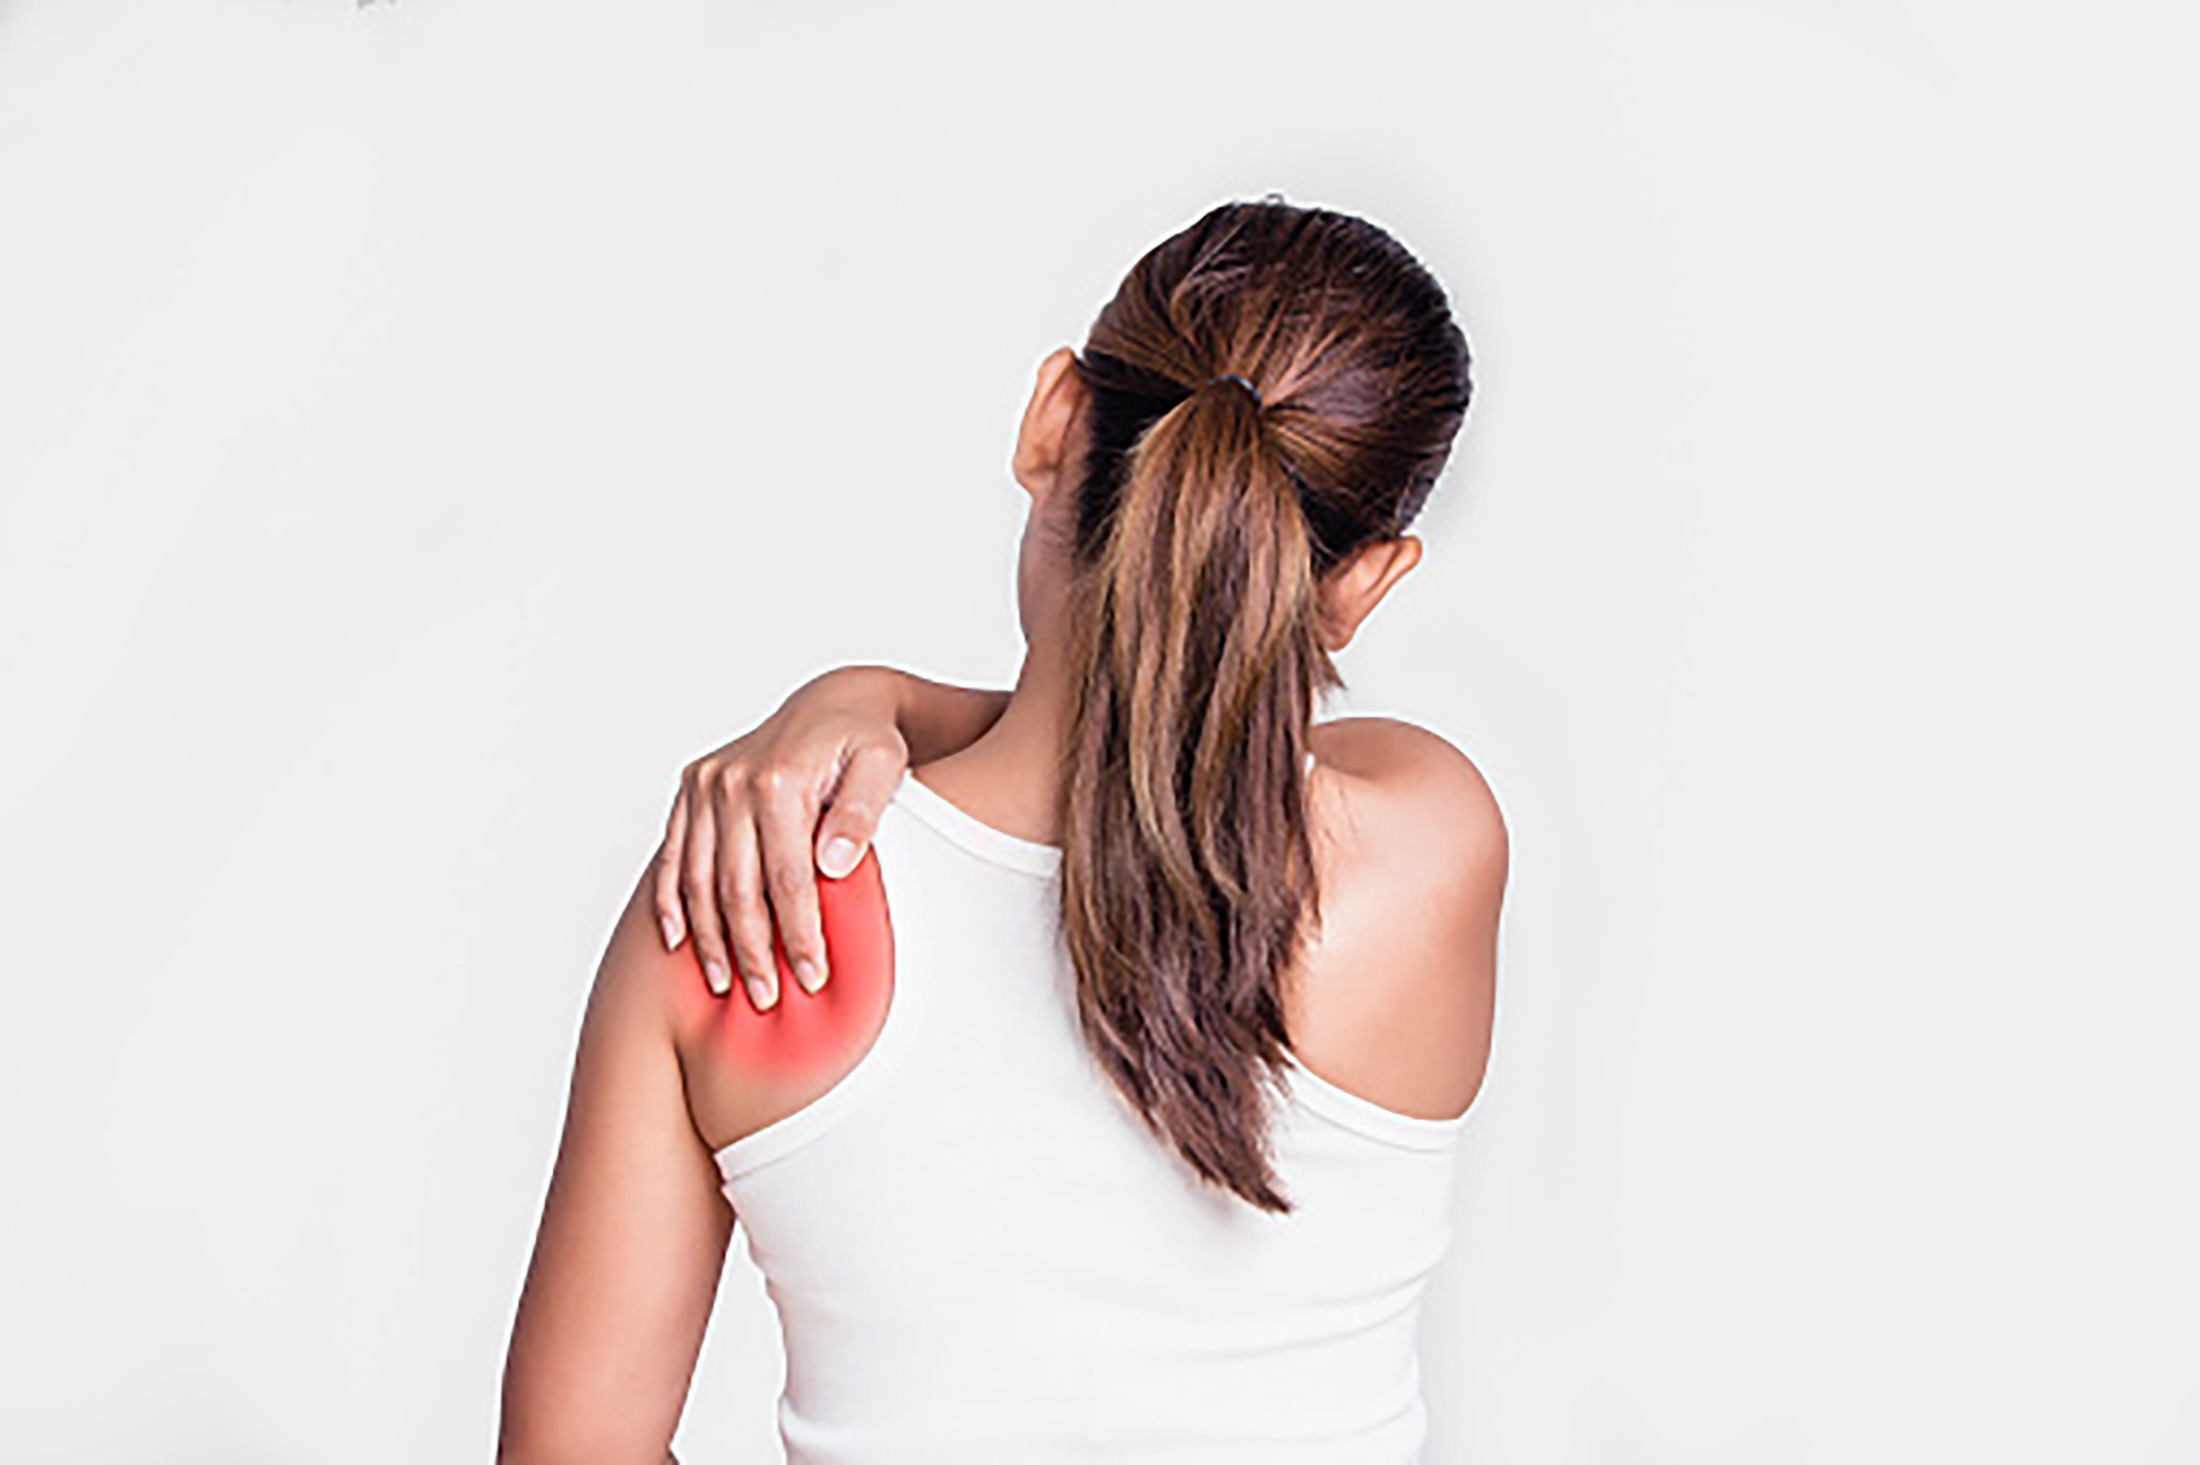 shoulder pain and chiropractic care